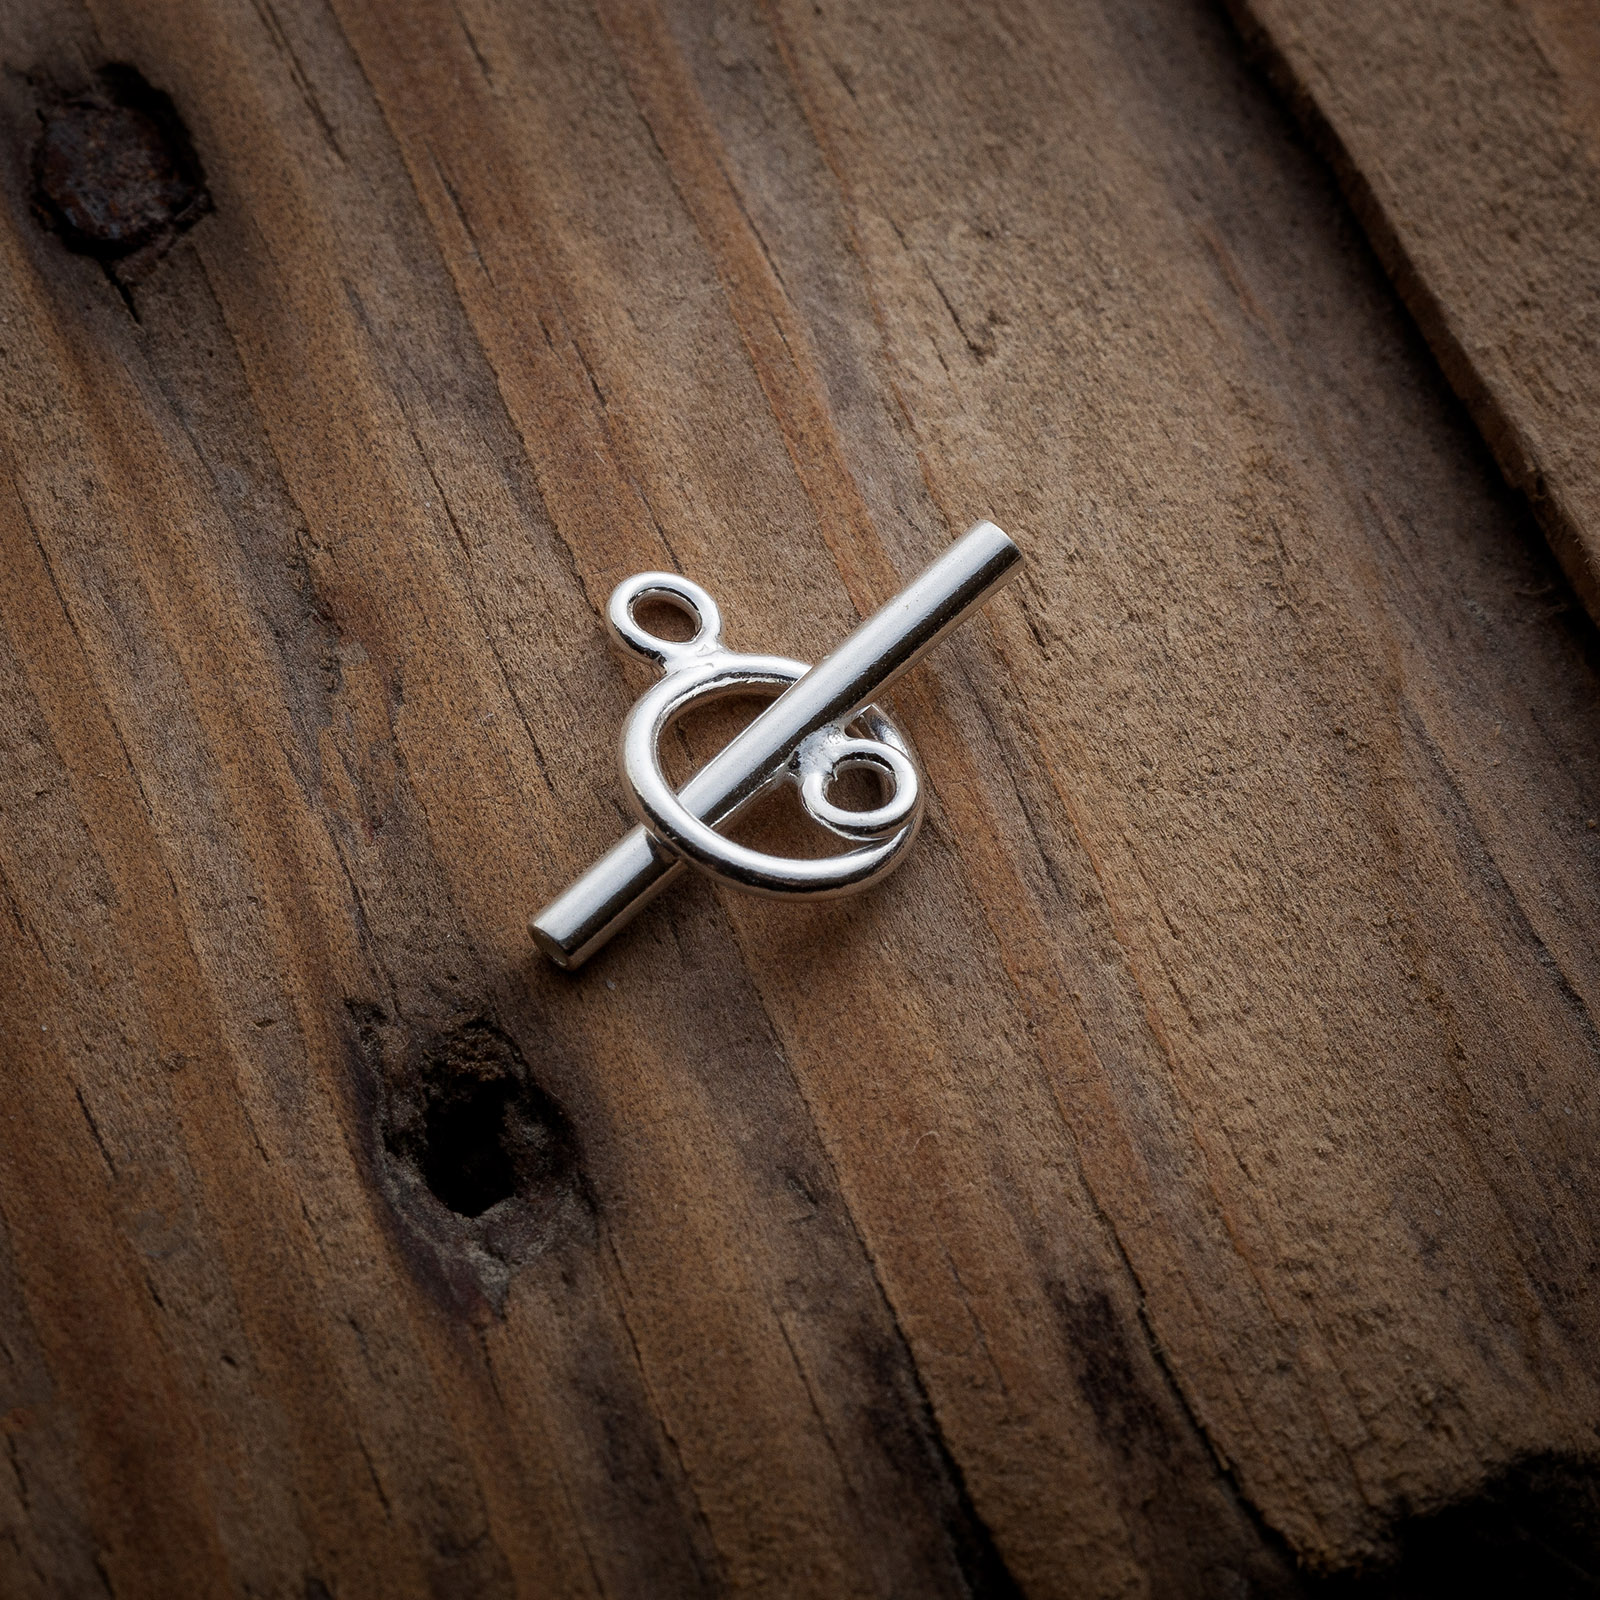 10 Jewelry Clasps and Closures You Should Know About – Noe's Jewelry